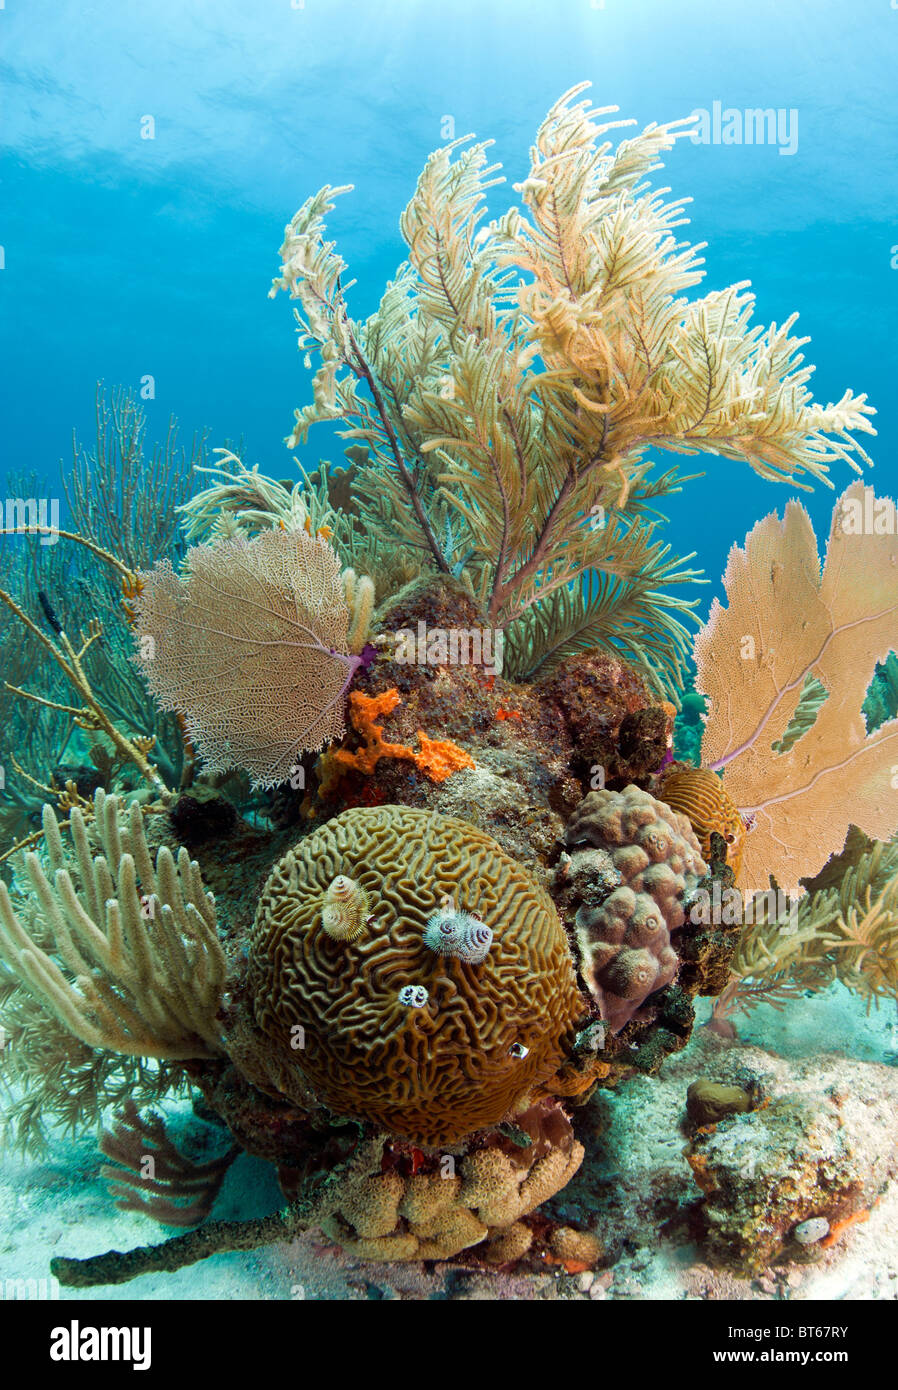 Coral reef off the coast of Roatan Honduras with brain coral and christmas tree worms Stock Photo